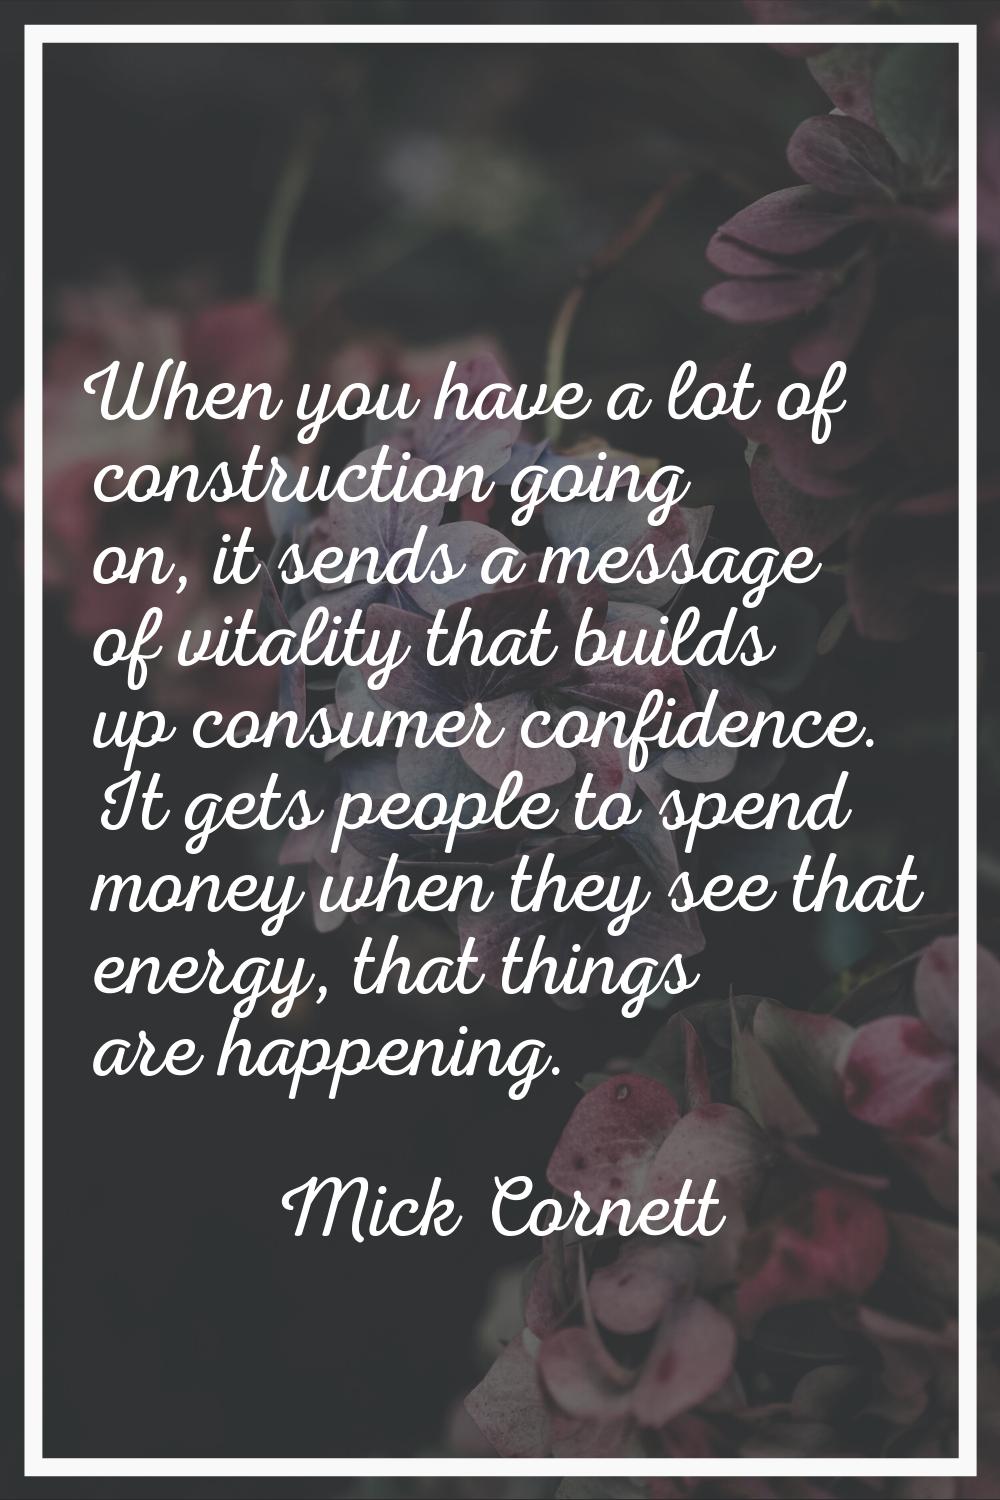 When you have a lot of construction going on, it sends a message of vitality that builds up consume